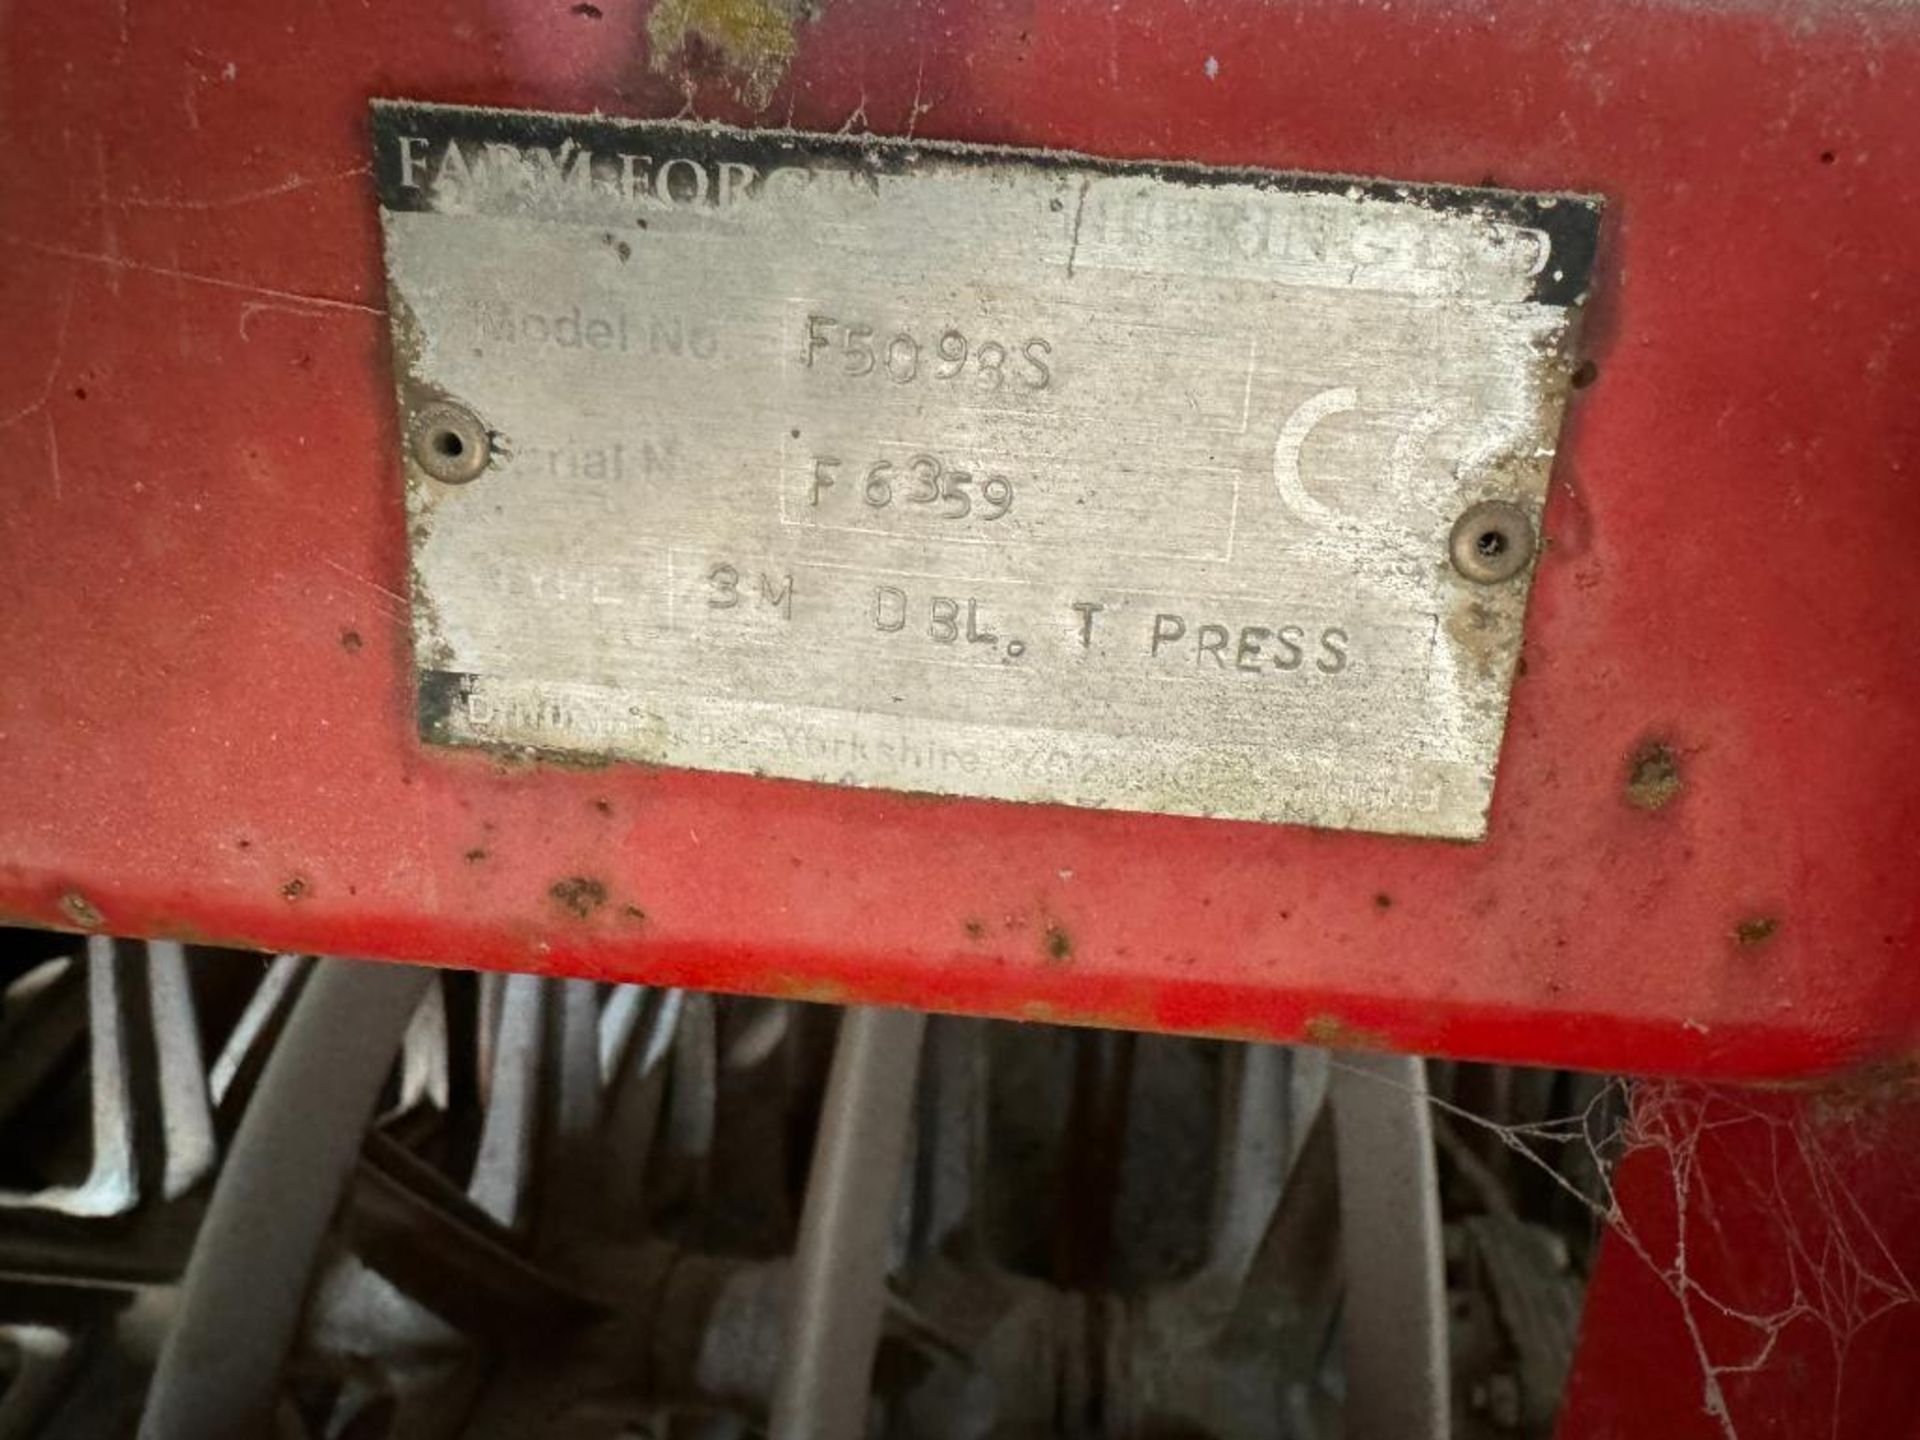 Trailed 3m press with 2 rows press rings and leading tines NB: Comes with manual - Image 3 of 4